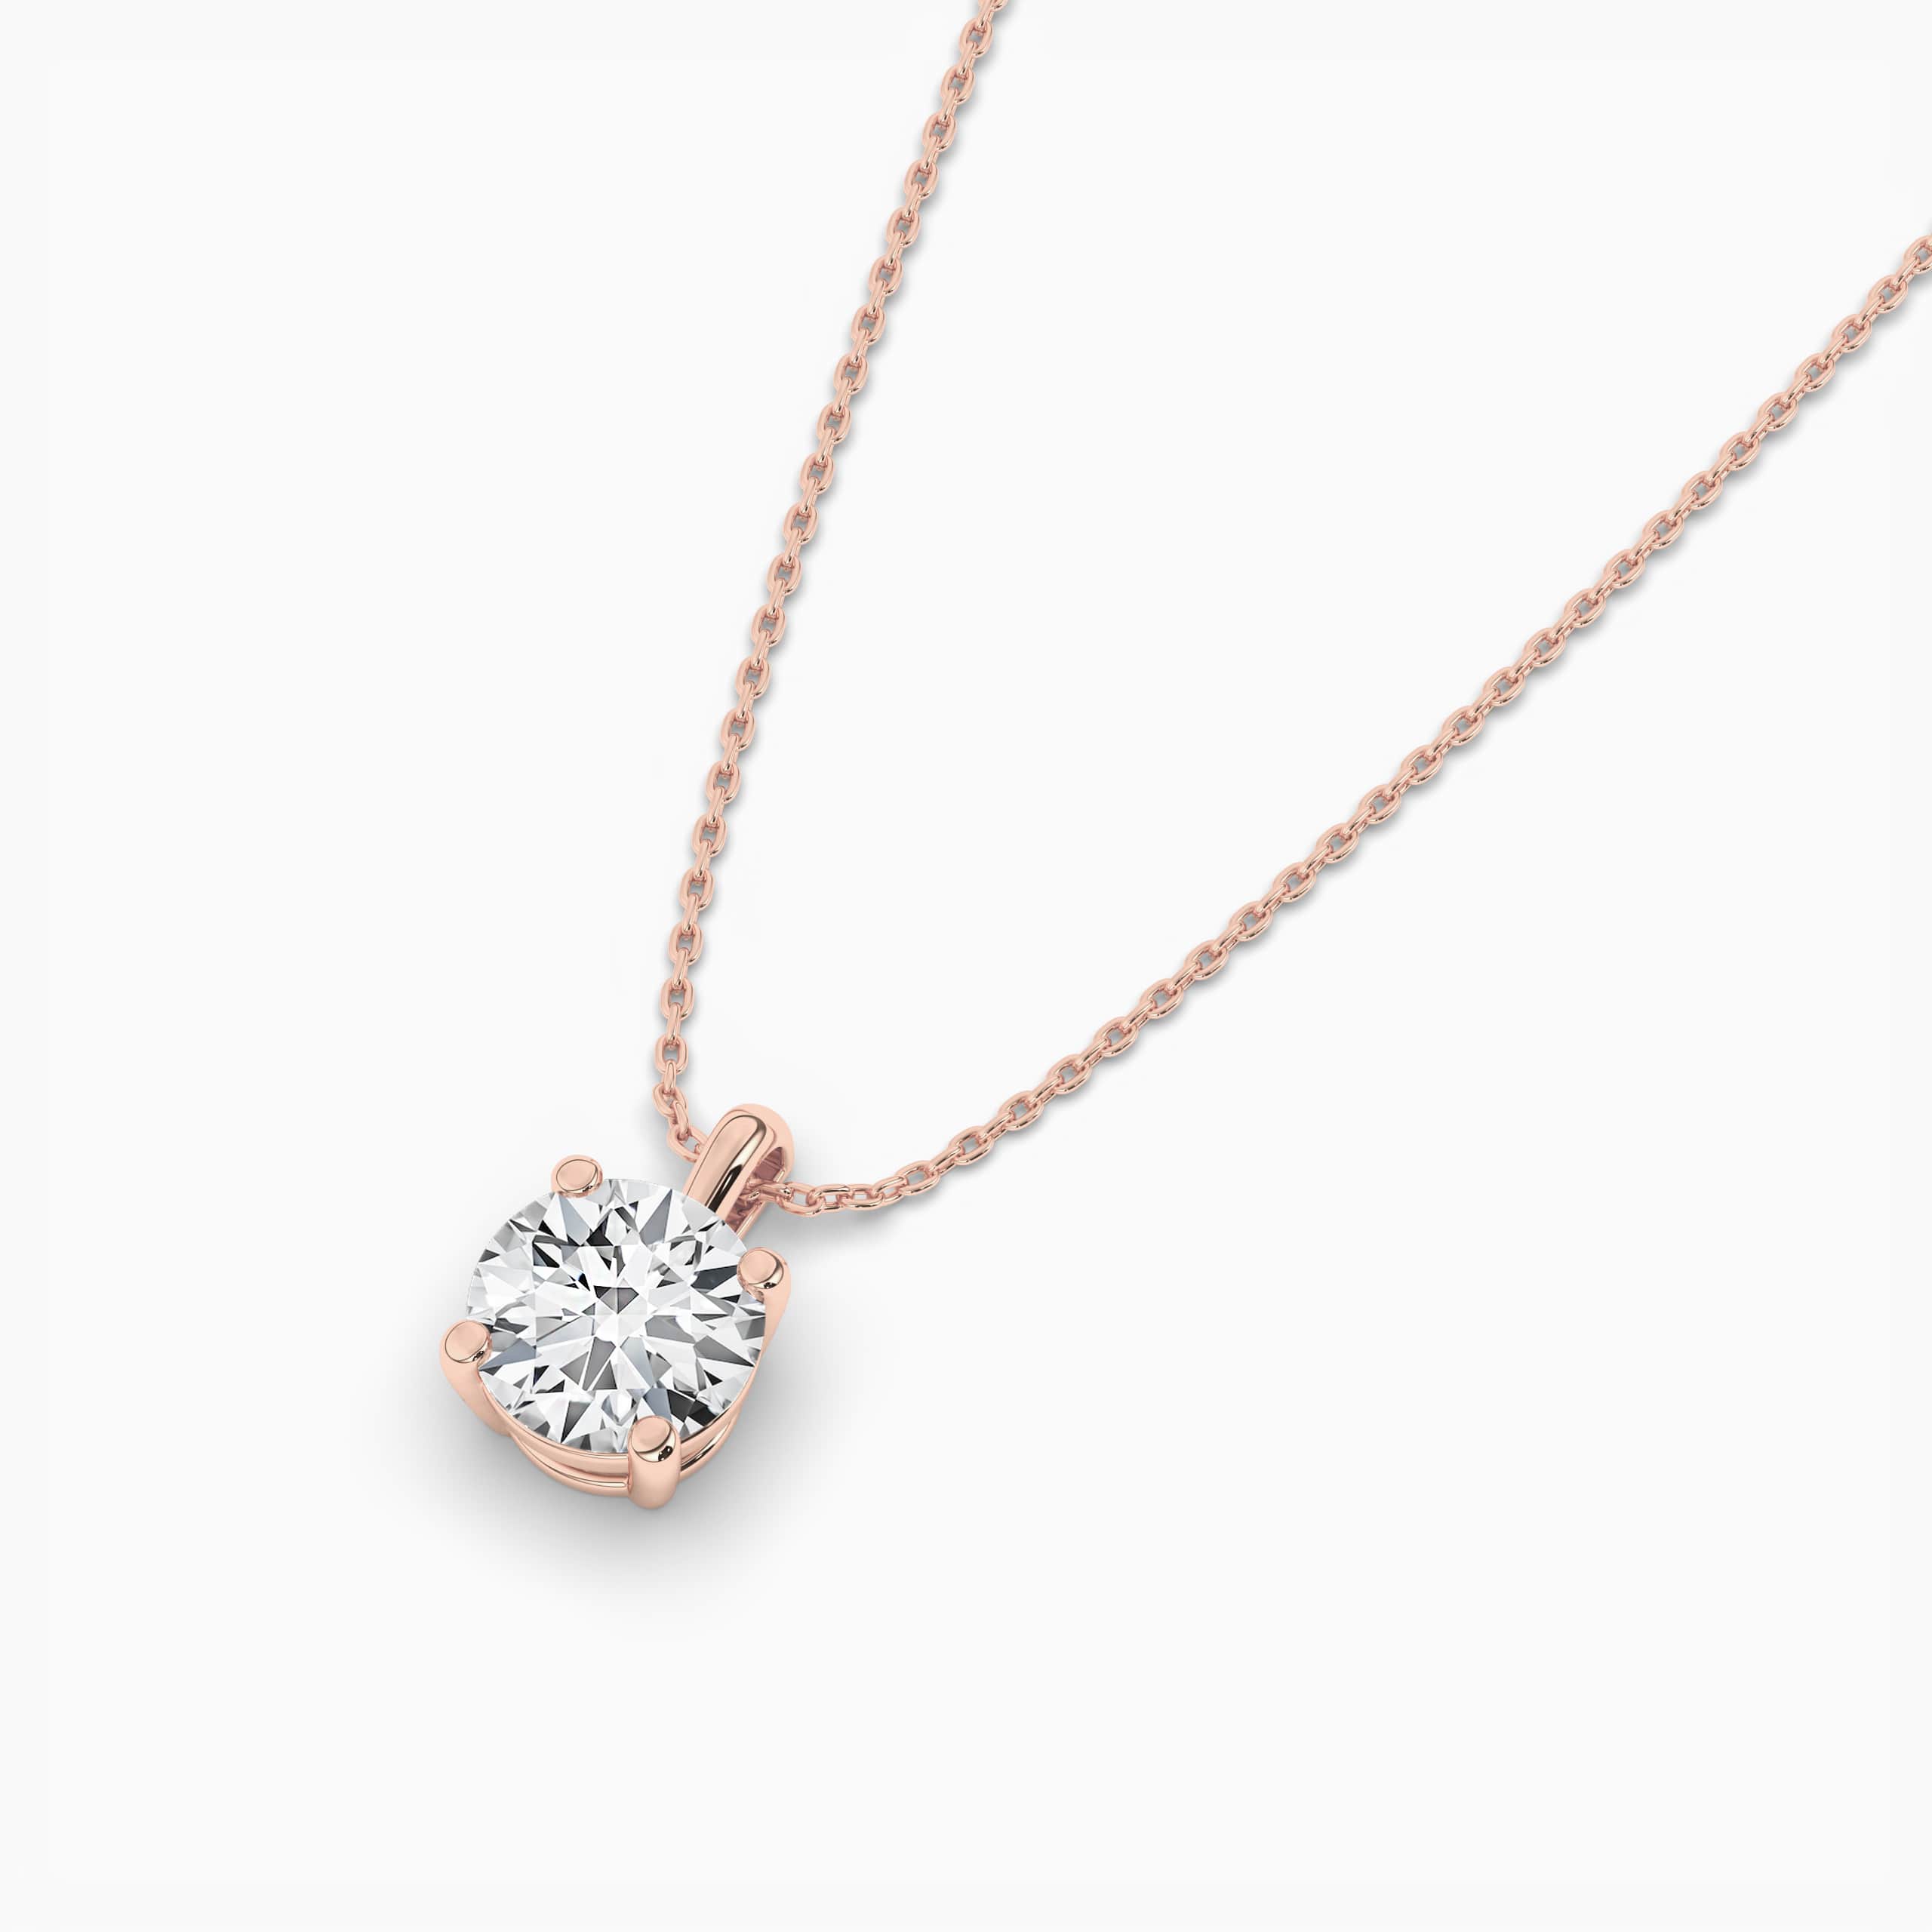 ROUND CUT SOLID ROSE GOLD SOLITAIRE PENDANT NECKLACE